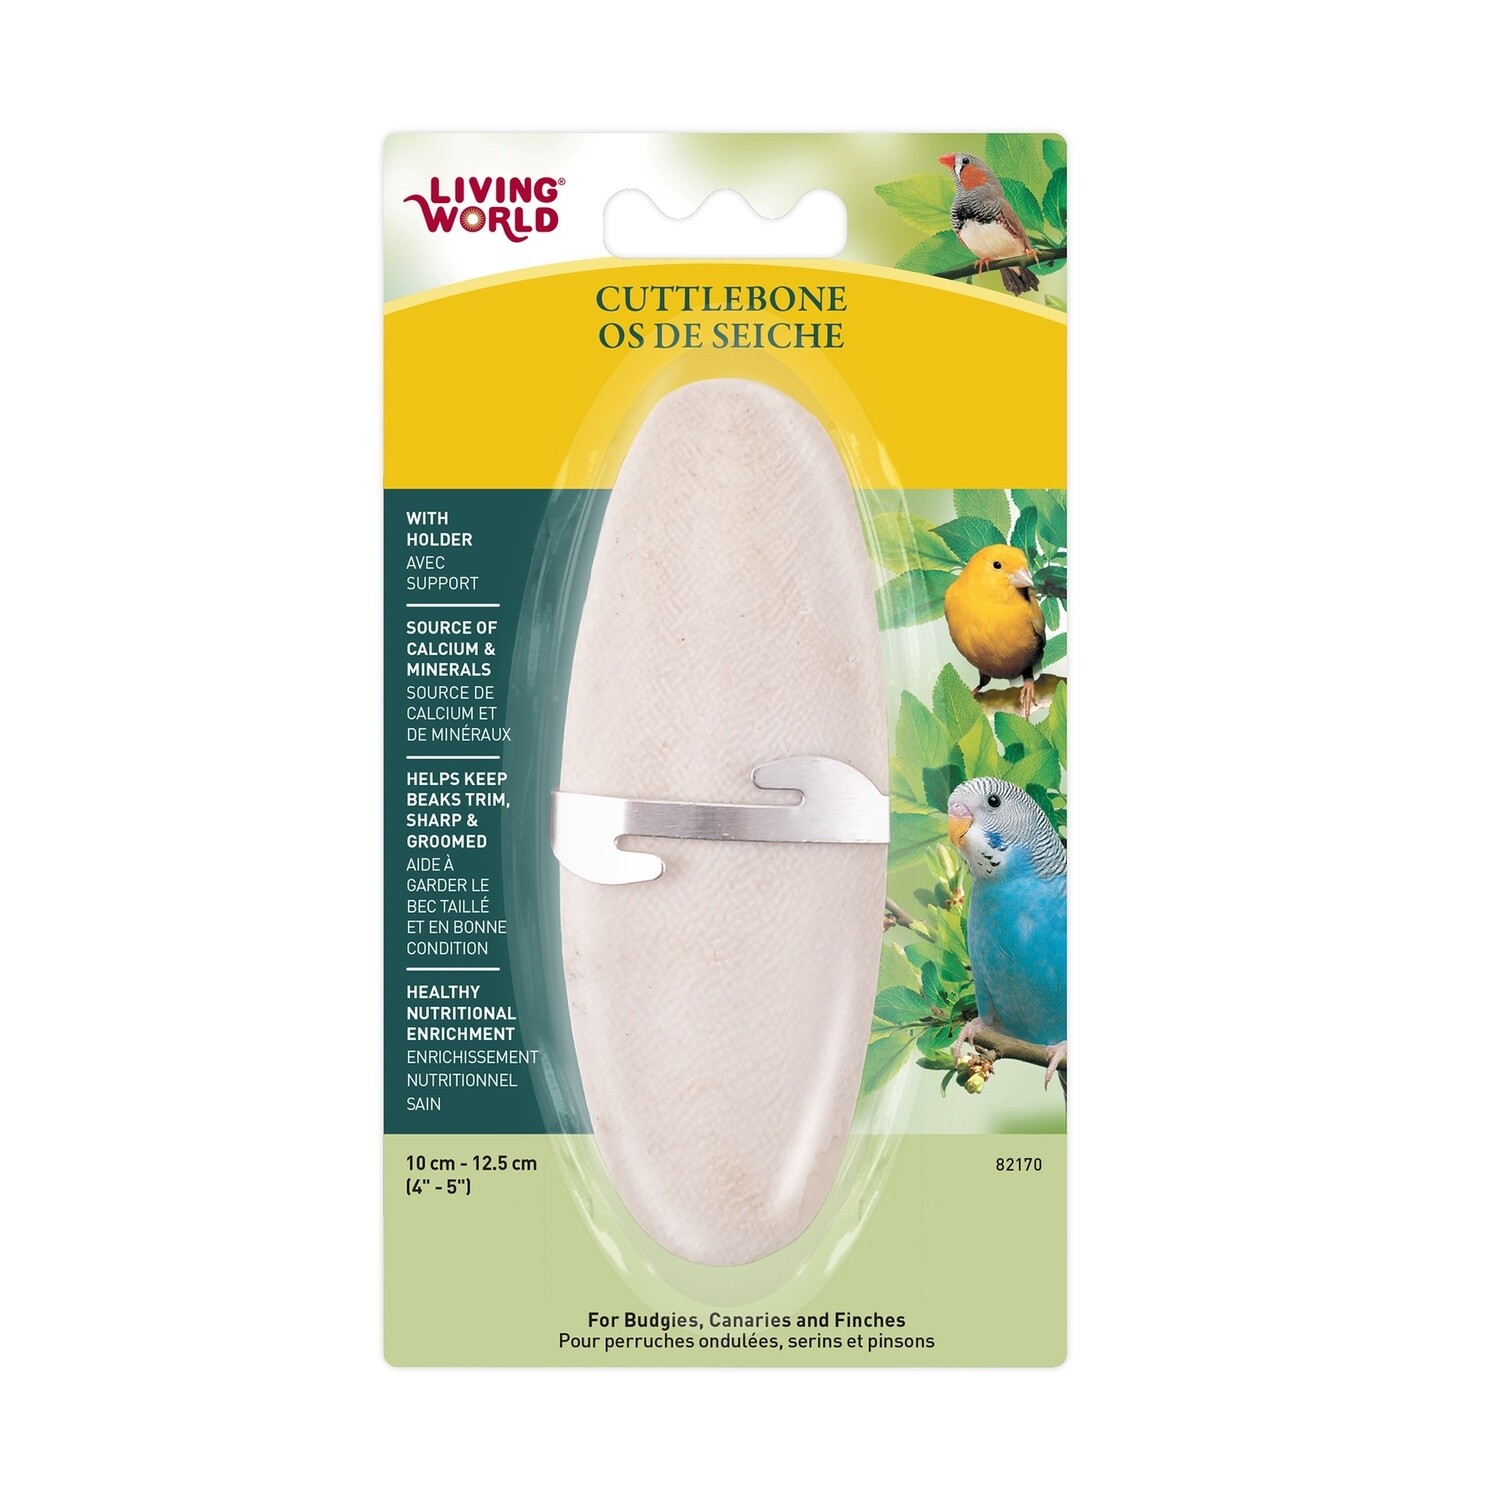 Living World Cuttlebone with Holder - Small